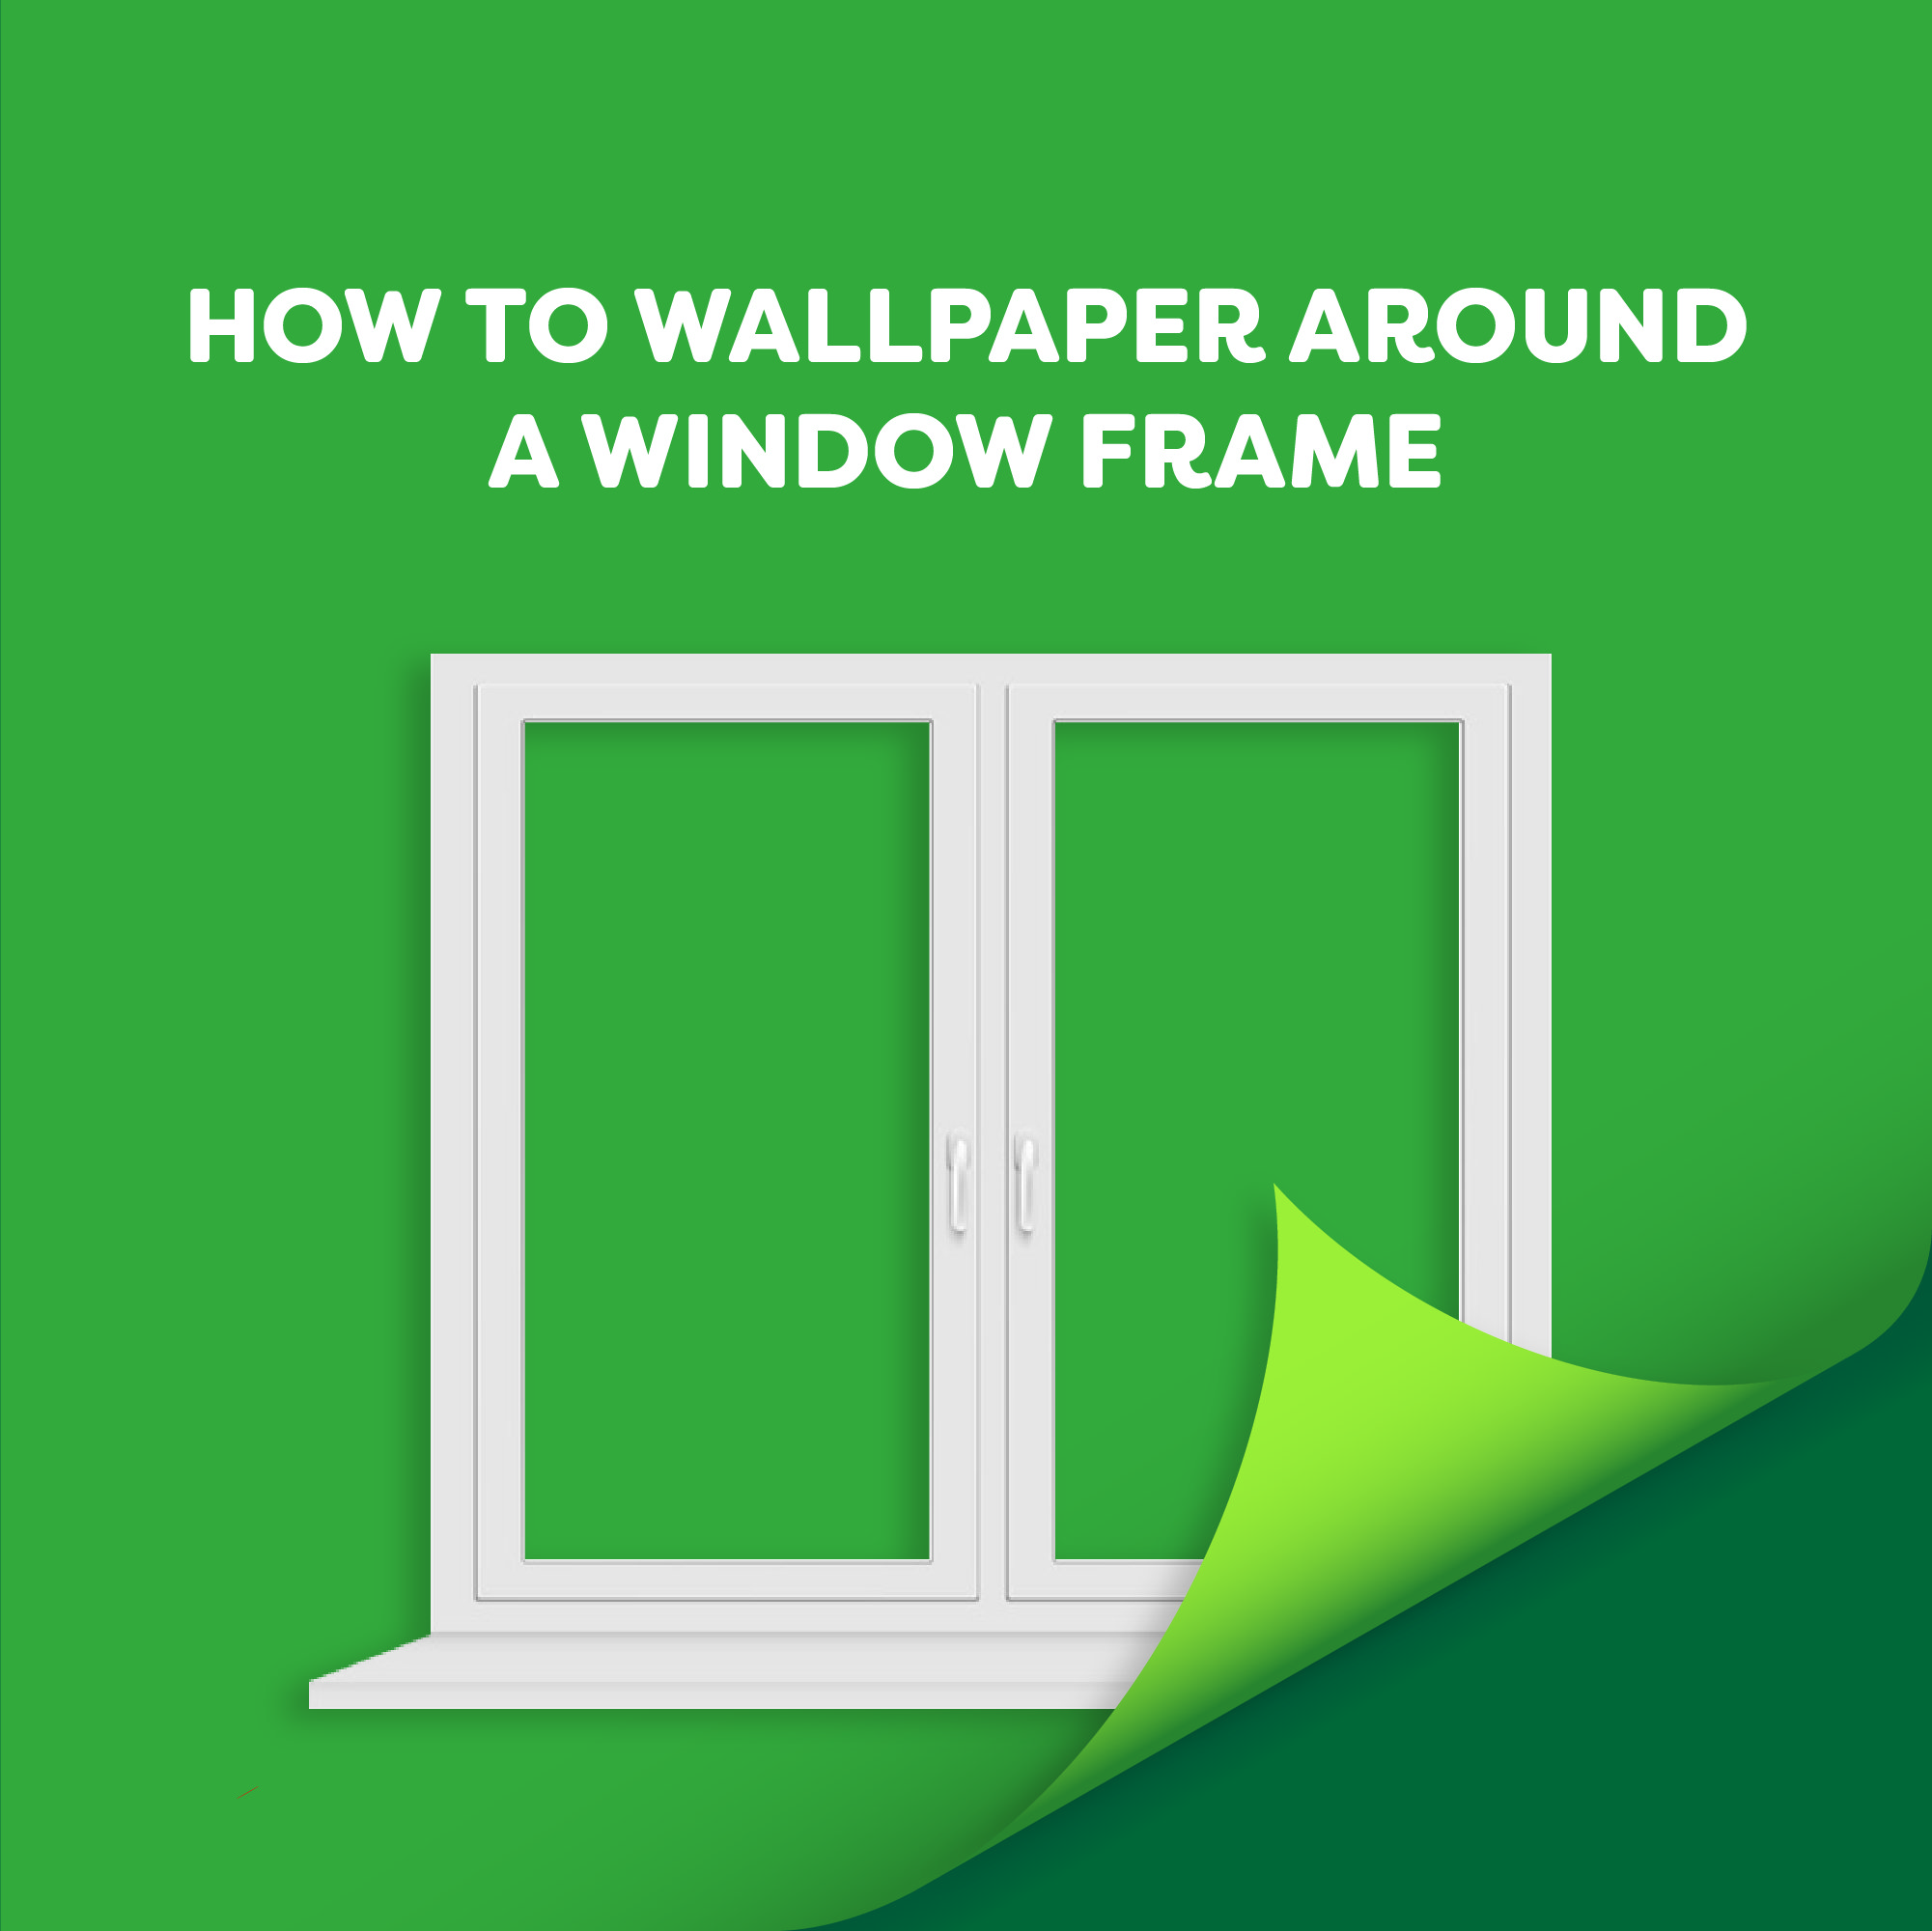 How to Wallpaper Around a Window Frame